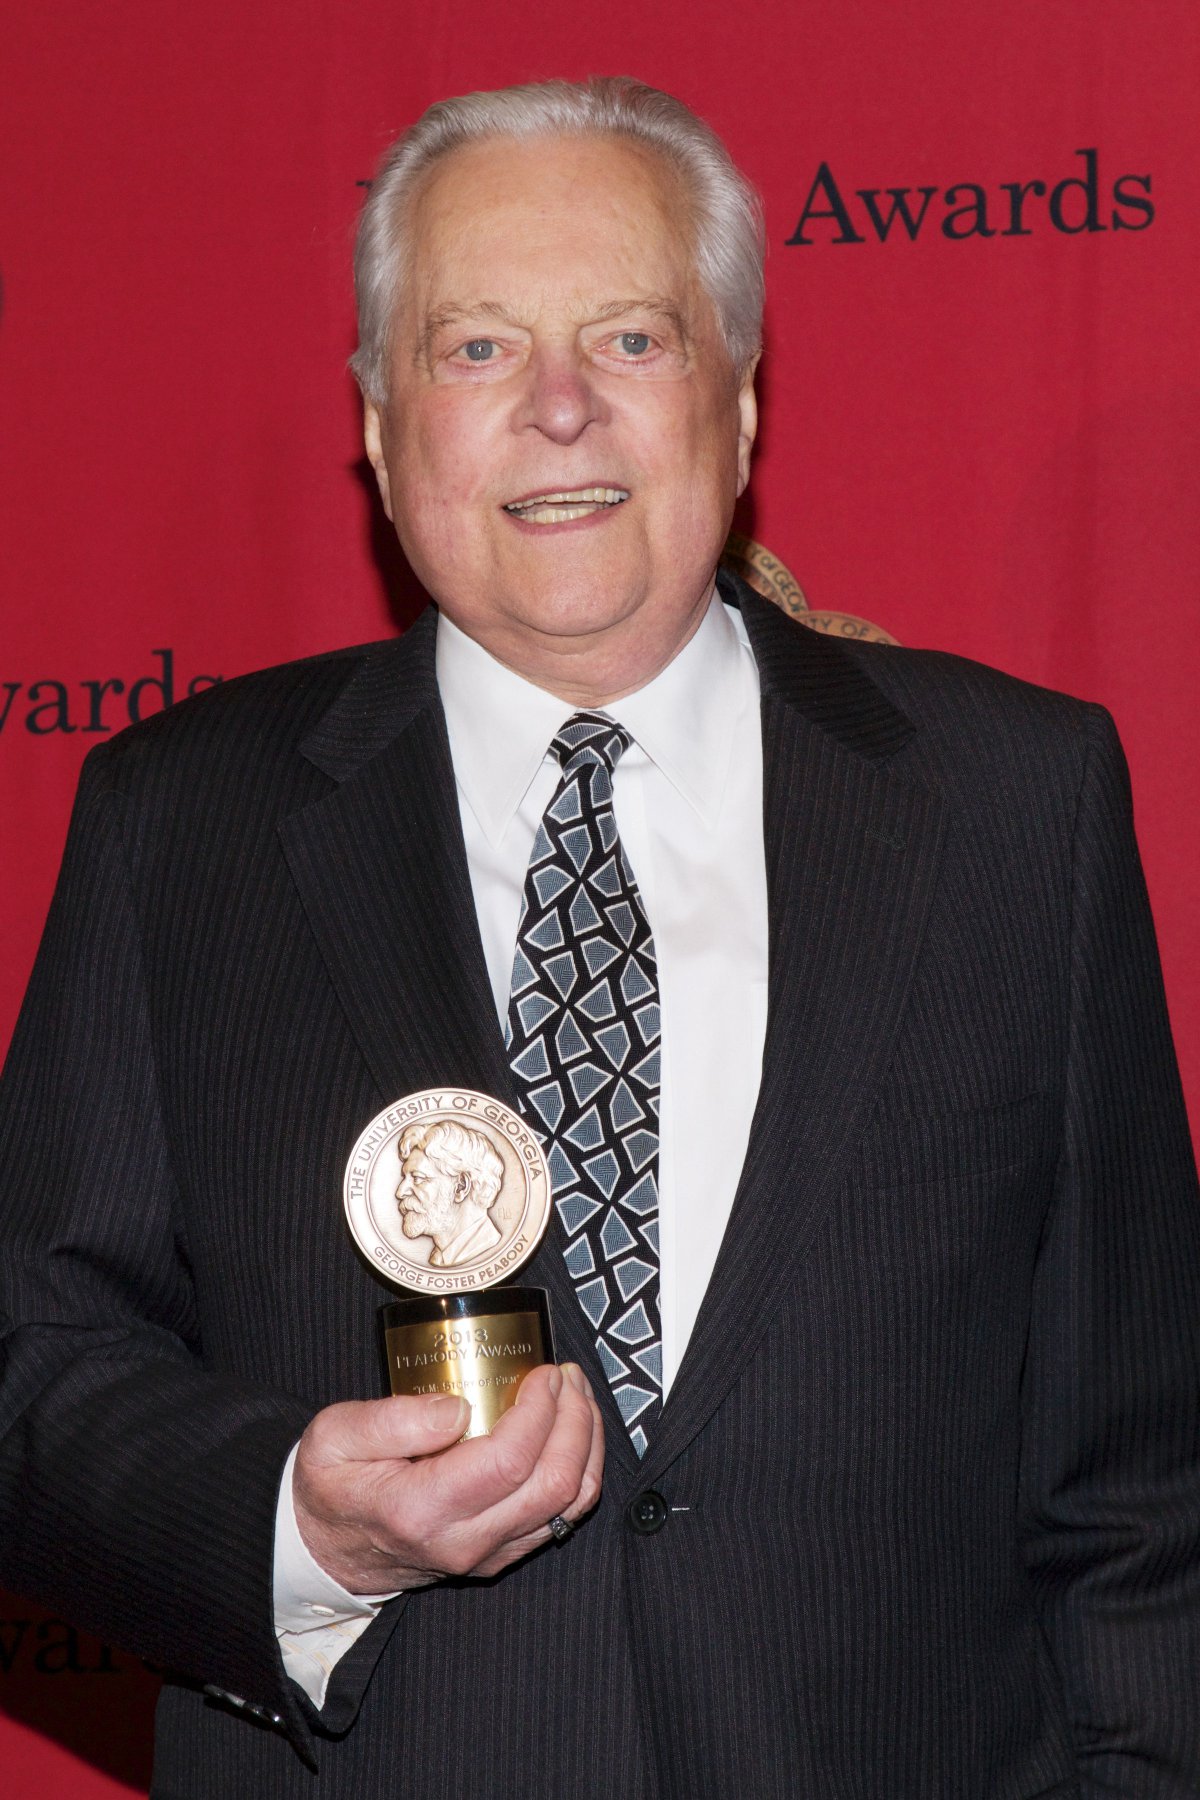 robert-osborne-to-succeed-army-archer-on-oscars-red-carpet-reality-tv